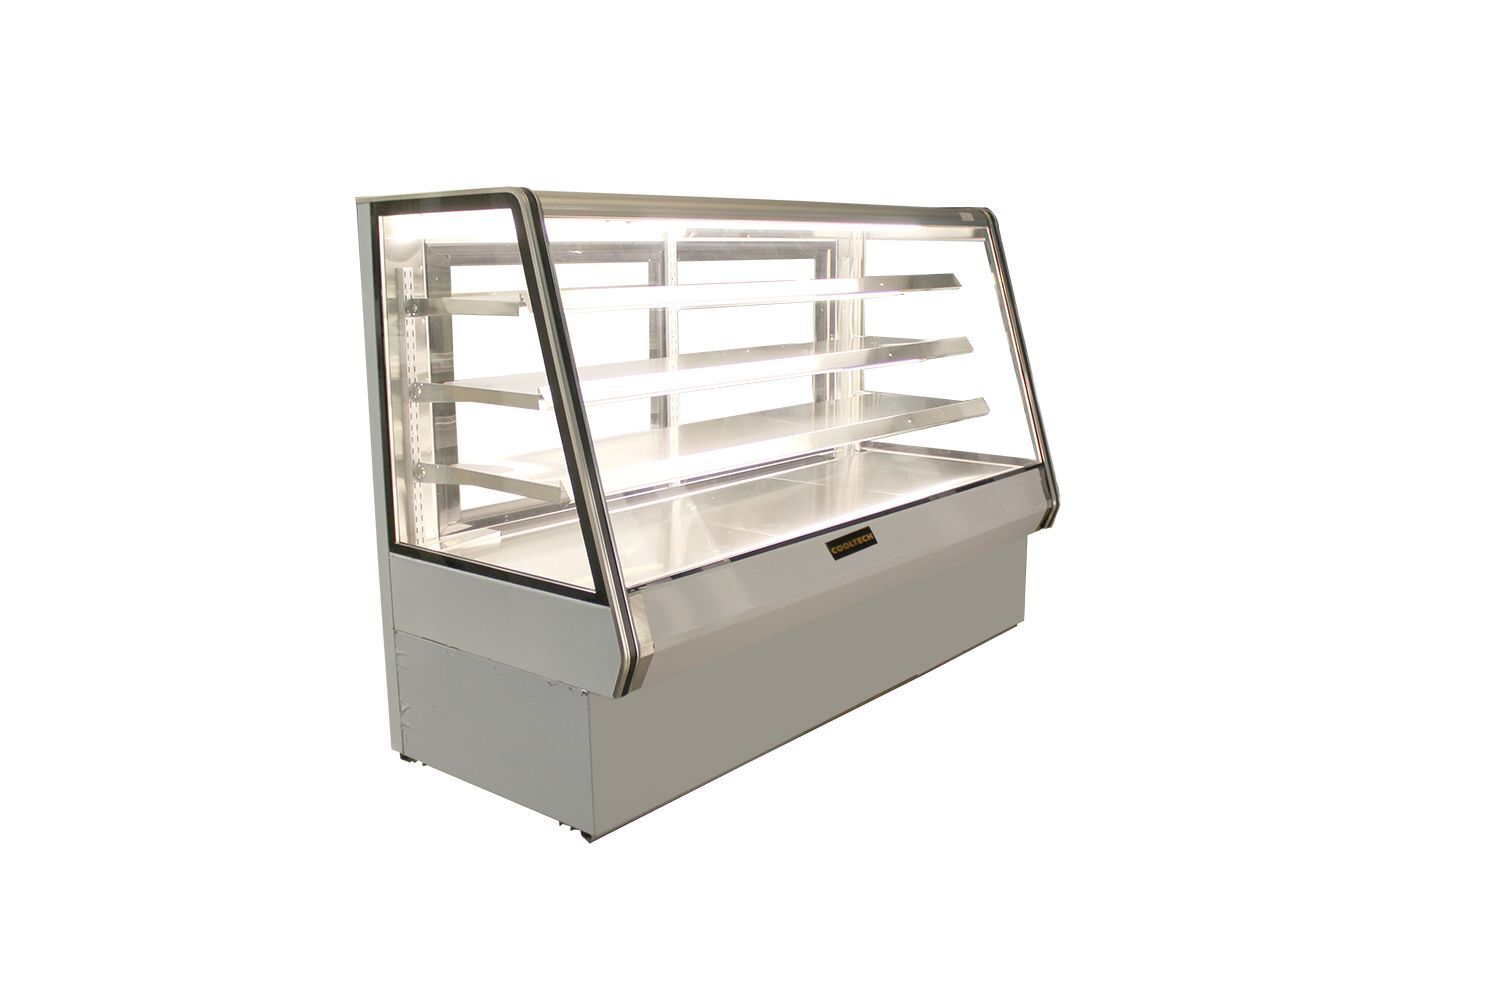 Cooltech Dry High Bakery Pastry Display Case 72" with glass enclosure and multiple shelves, isolated on a white background.